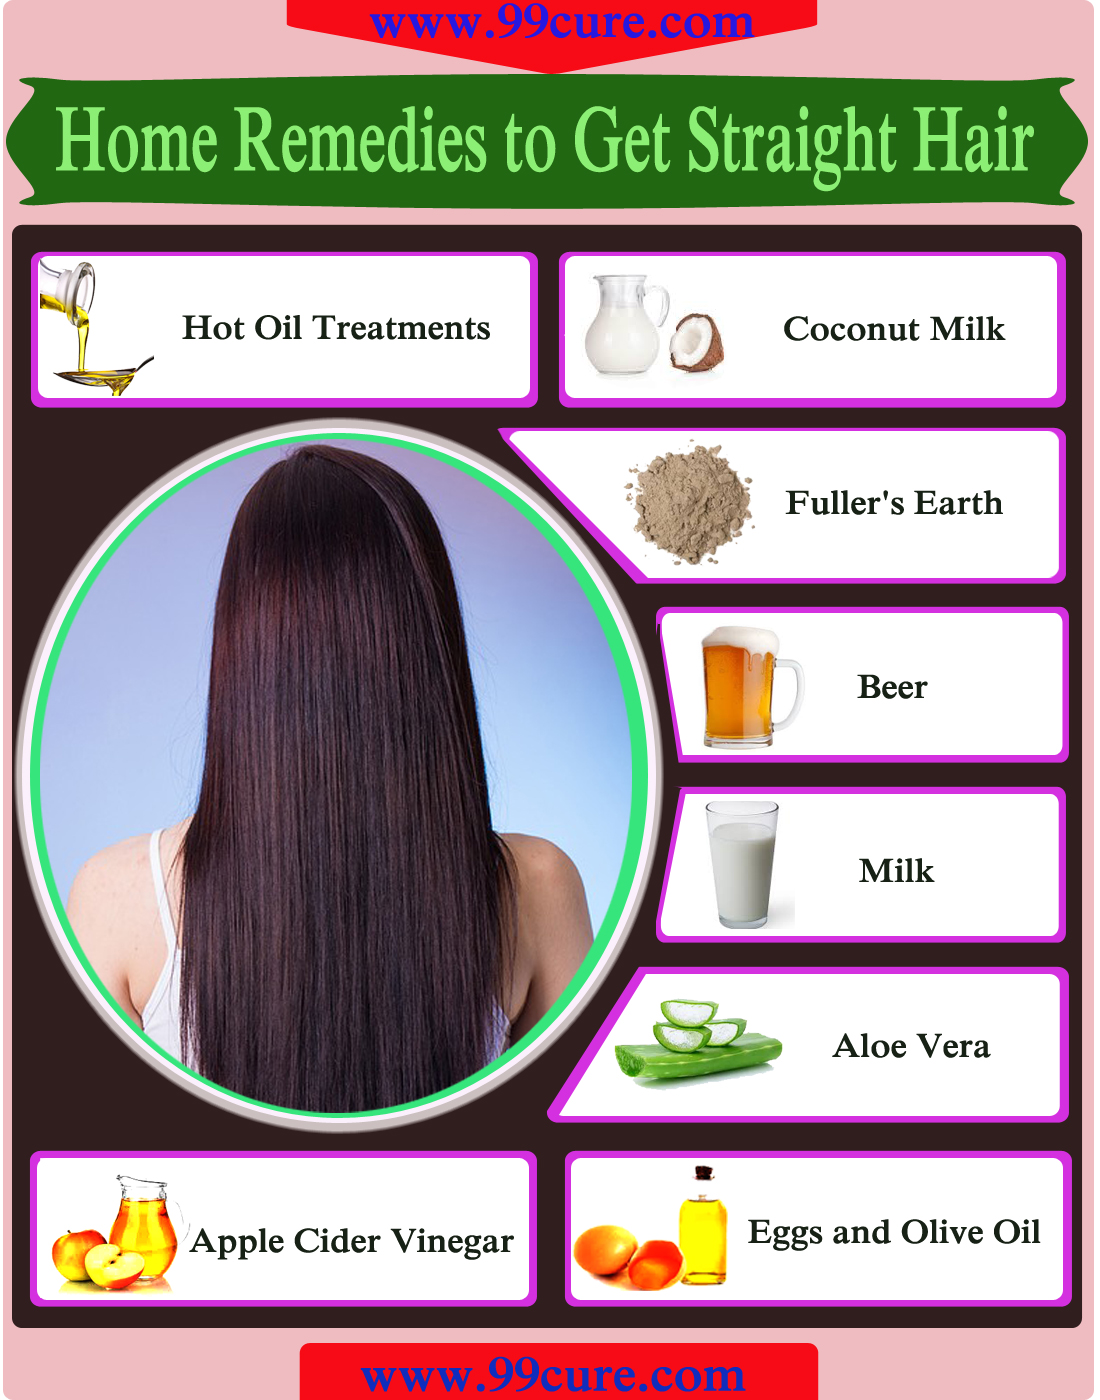 Home Remedies to Get Straight Hair